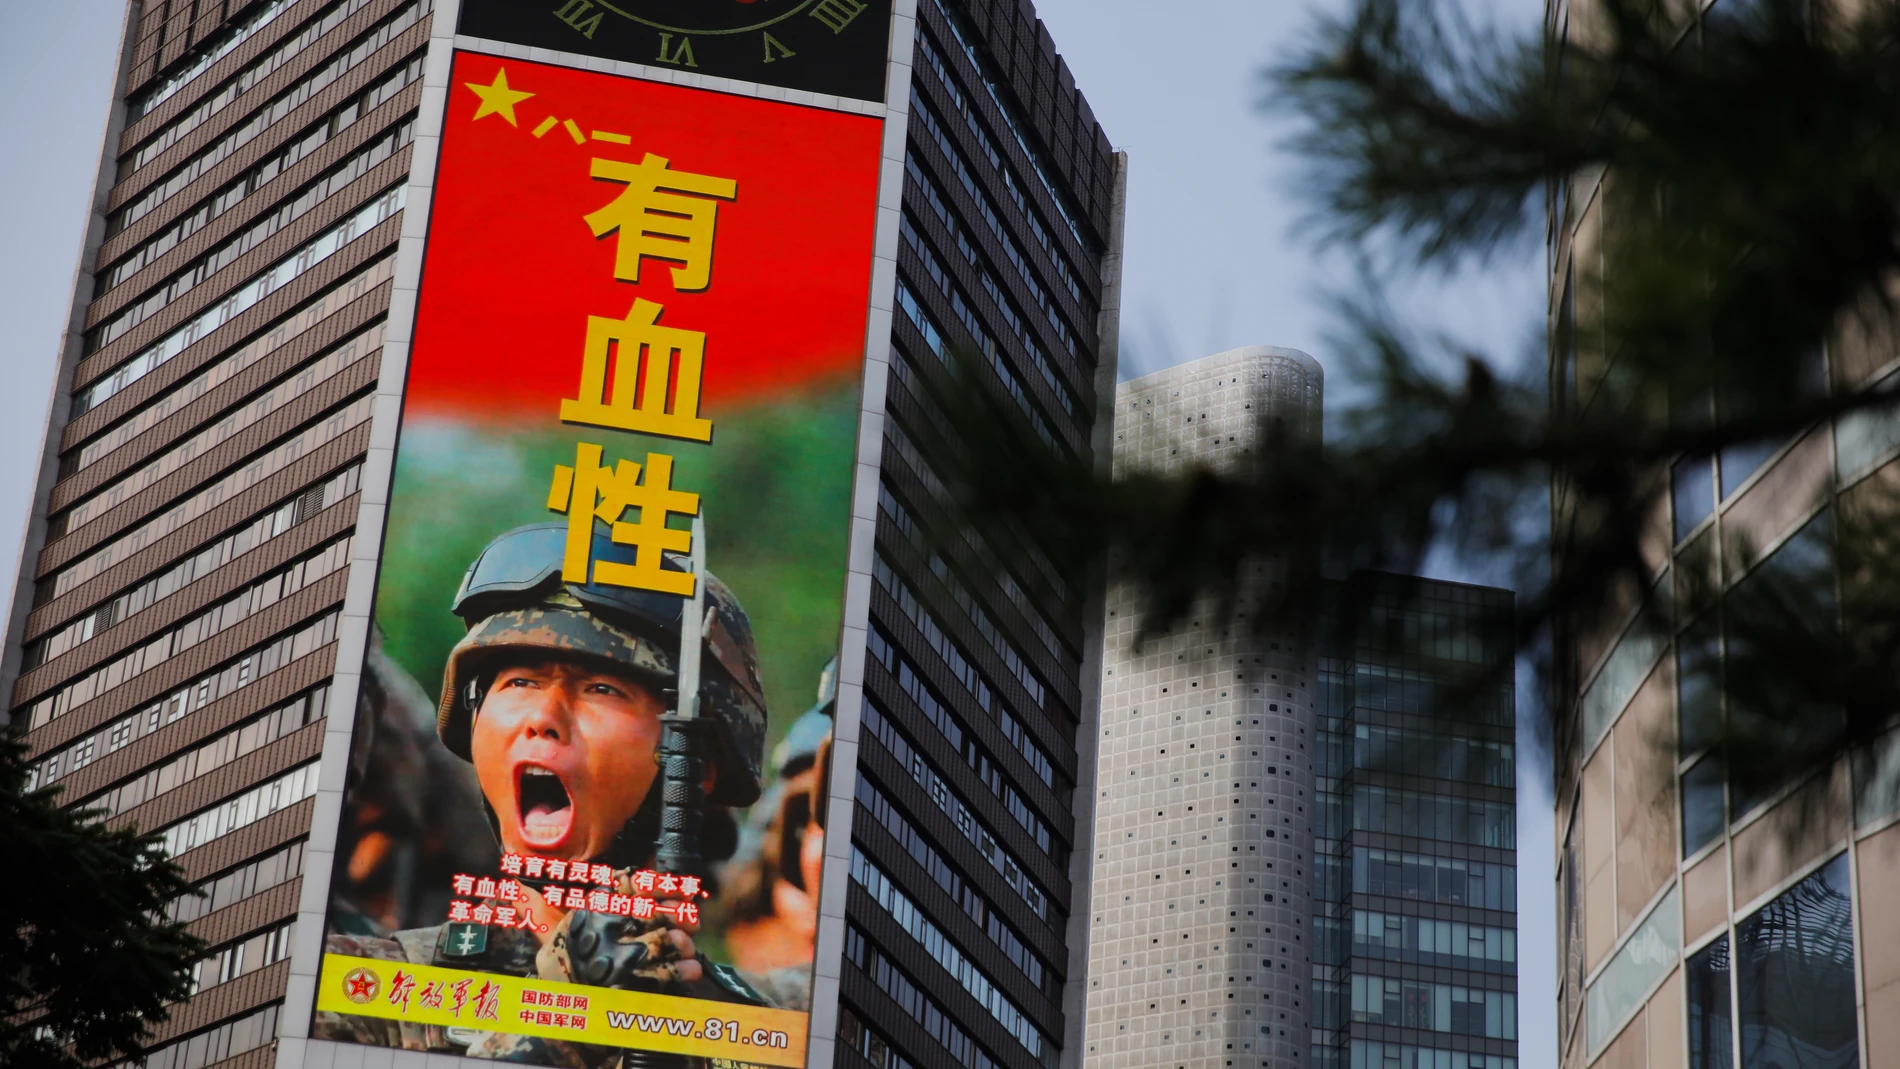 Beijing (China), 19/08/2023.- A military advertisement marking the 95th founding anniversary of the People's Liberation Army (PLA) is displayed at an office building in Beijing, China, 19 August 2023. China is launching military drills around Taiwan on 19 August, in response to the Taiwan'Äôs Vice President William Lai's visit in the United States. (Estados Unidos) EFE/EPA/WU HAO 